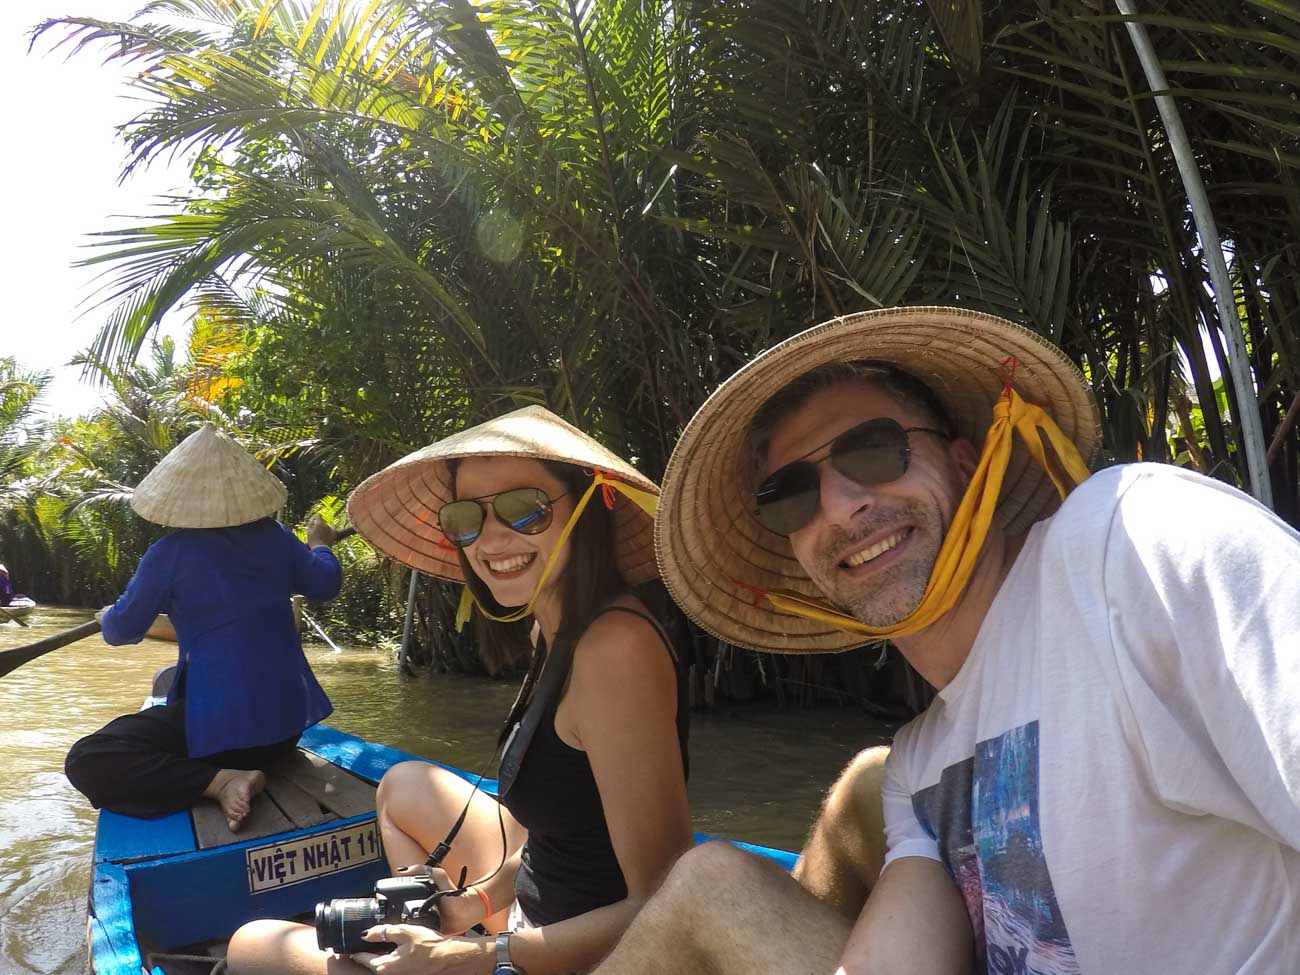 A couple on a boat. They are on a Mekong Delta Tour, a famous day trip from Ho Chi Minh city.